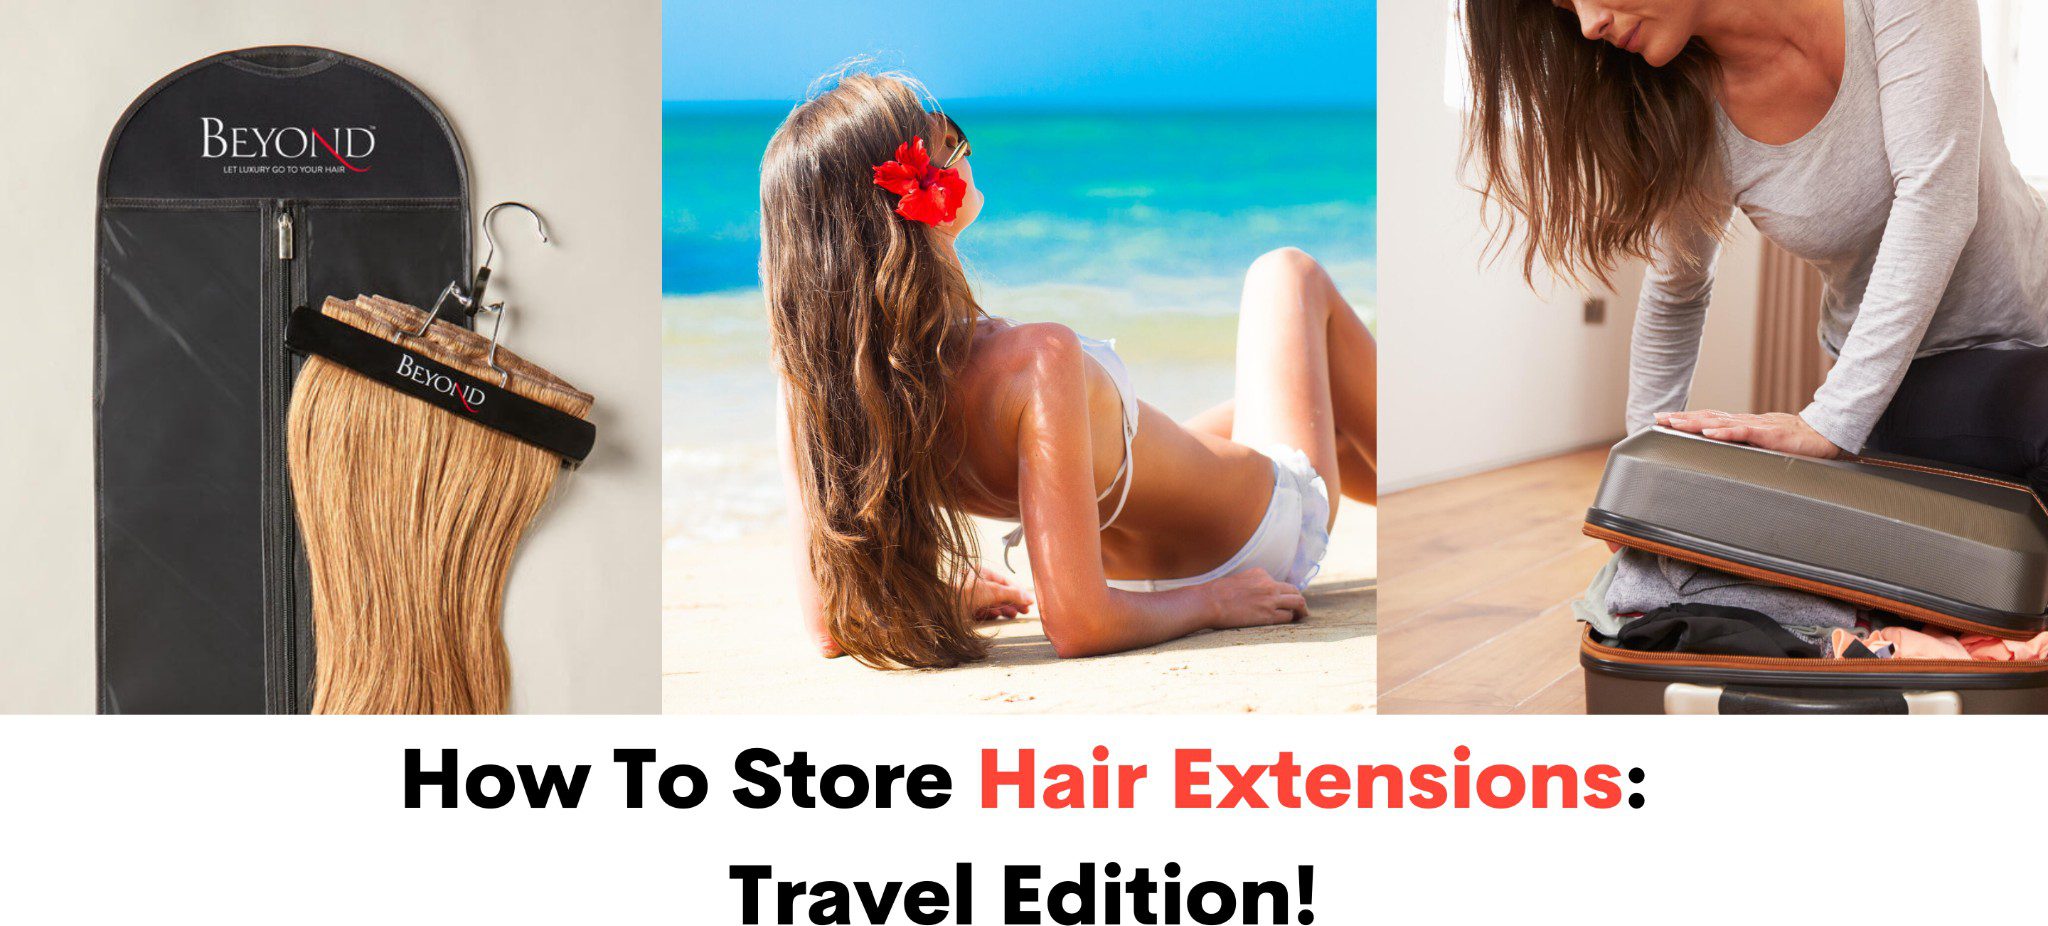 How To Store Hair Extensions